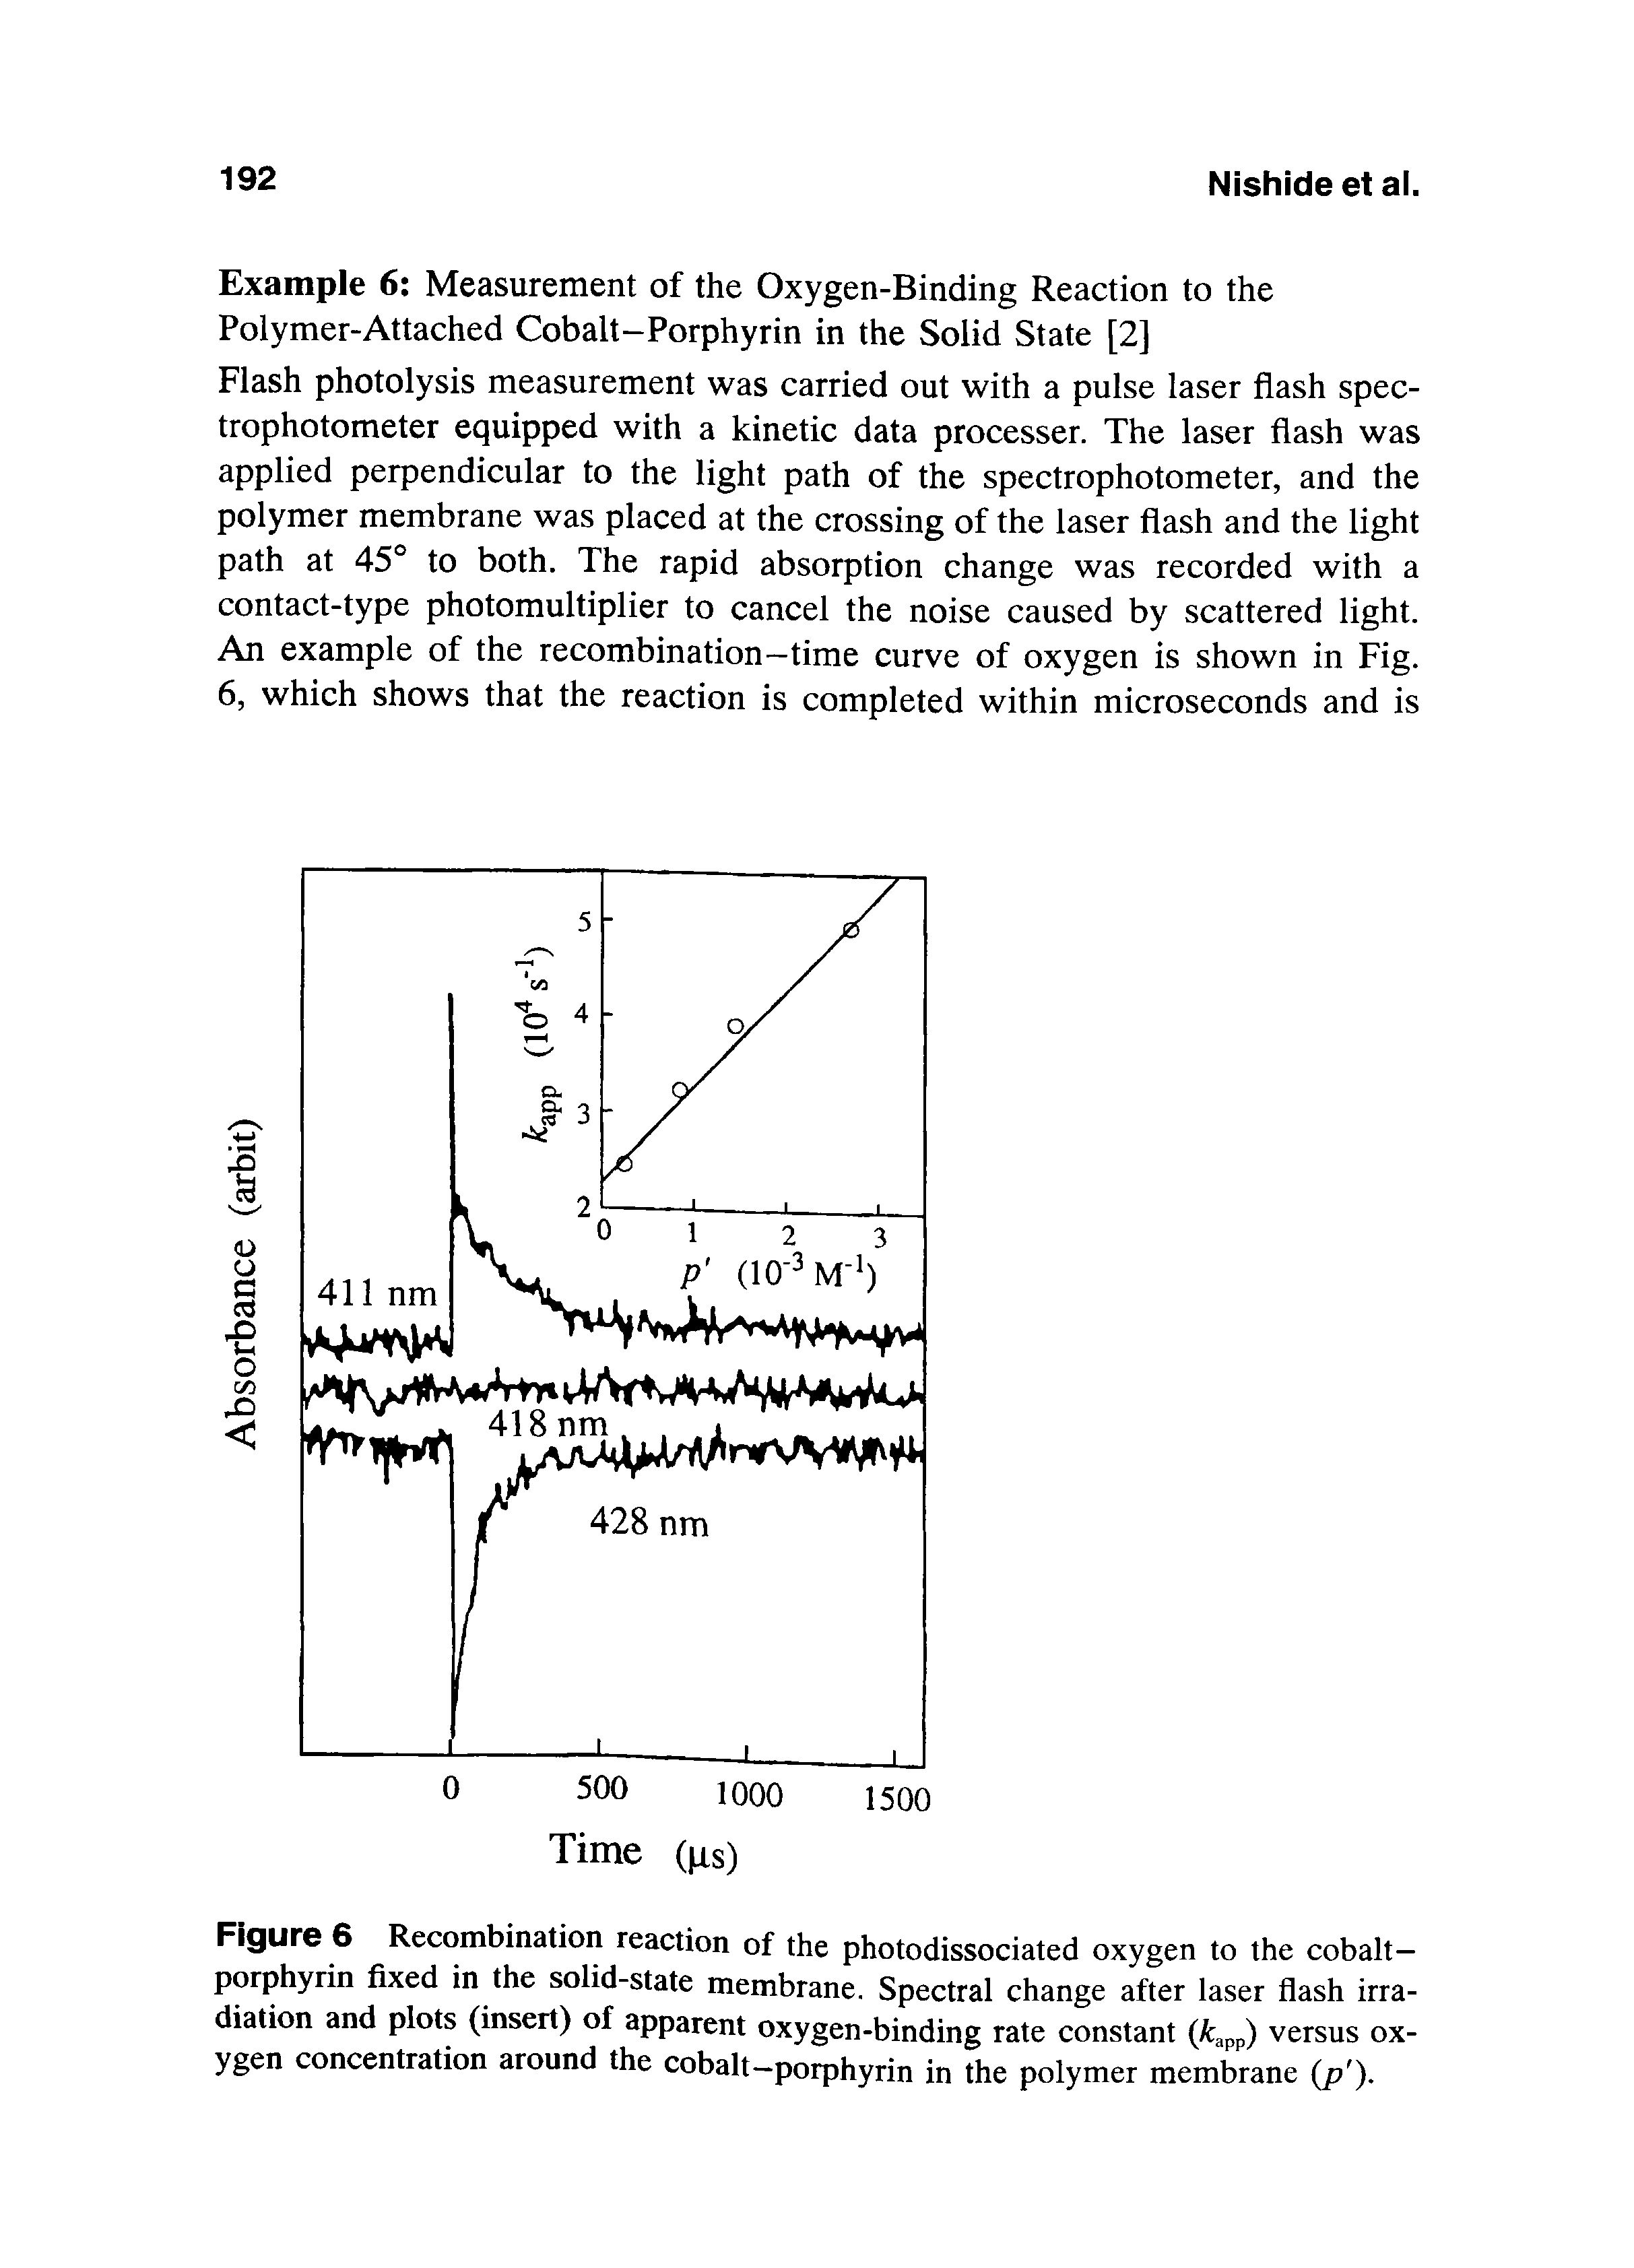 Figure 6 Recombination reaction of the photodissociated oxygen to the cobalt-porphyrin fixed in the solid-state membrane. Spectral change after laser flash irradiation and plots (insert) of apparent oxygen-binding rate constant (A app) versus oxygen concentration around the cobalt—porphyrin in the polymer membrane (p ).